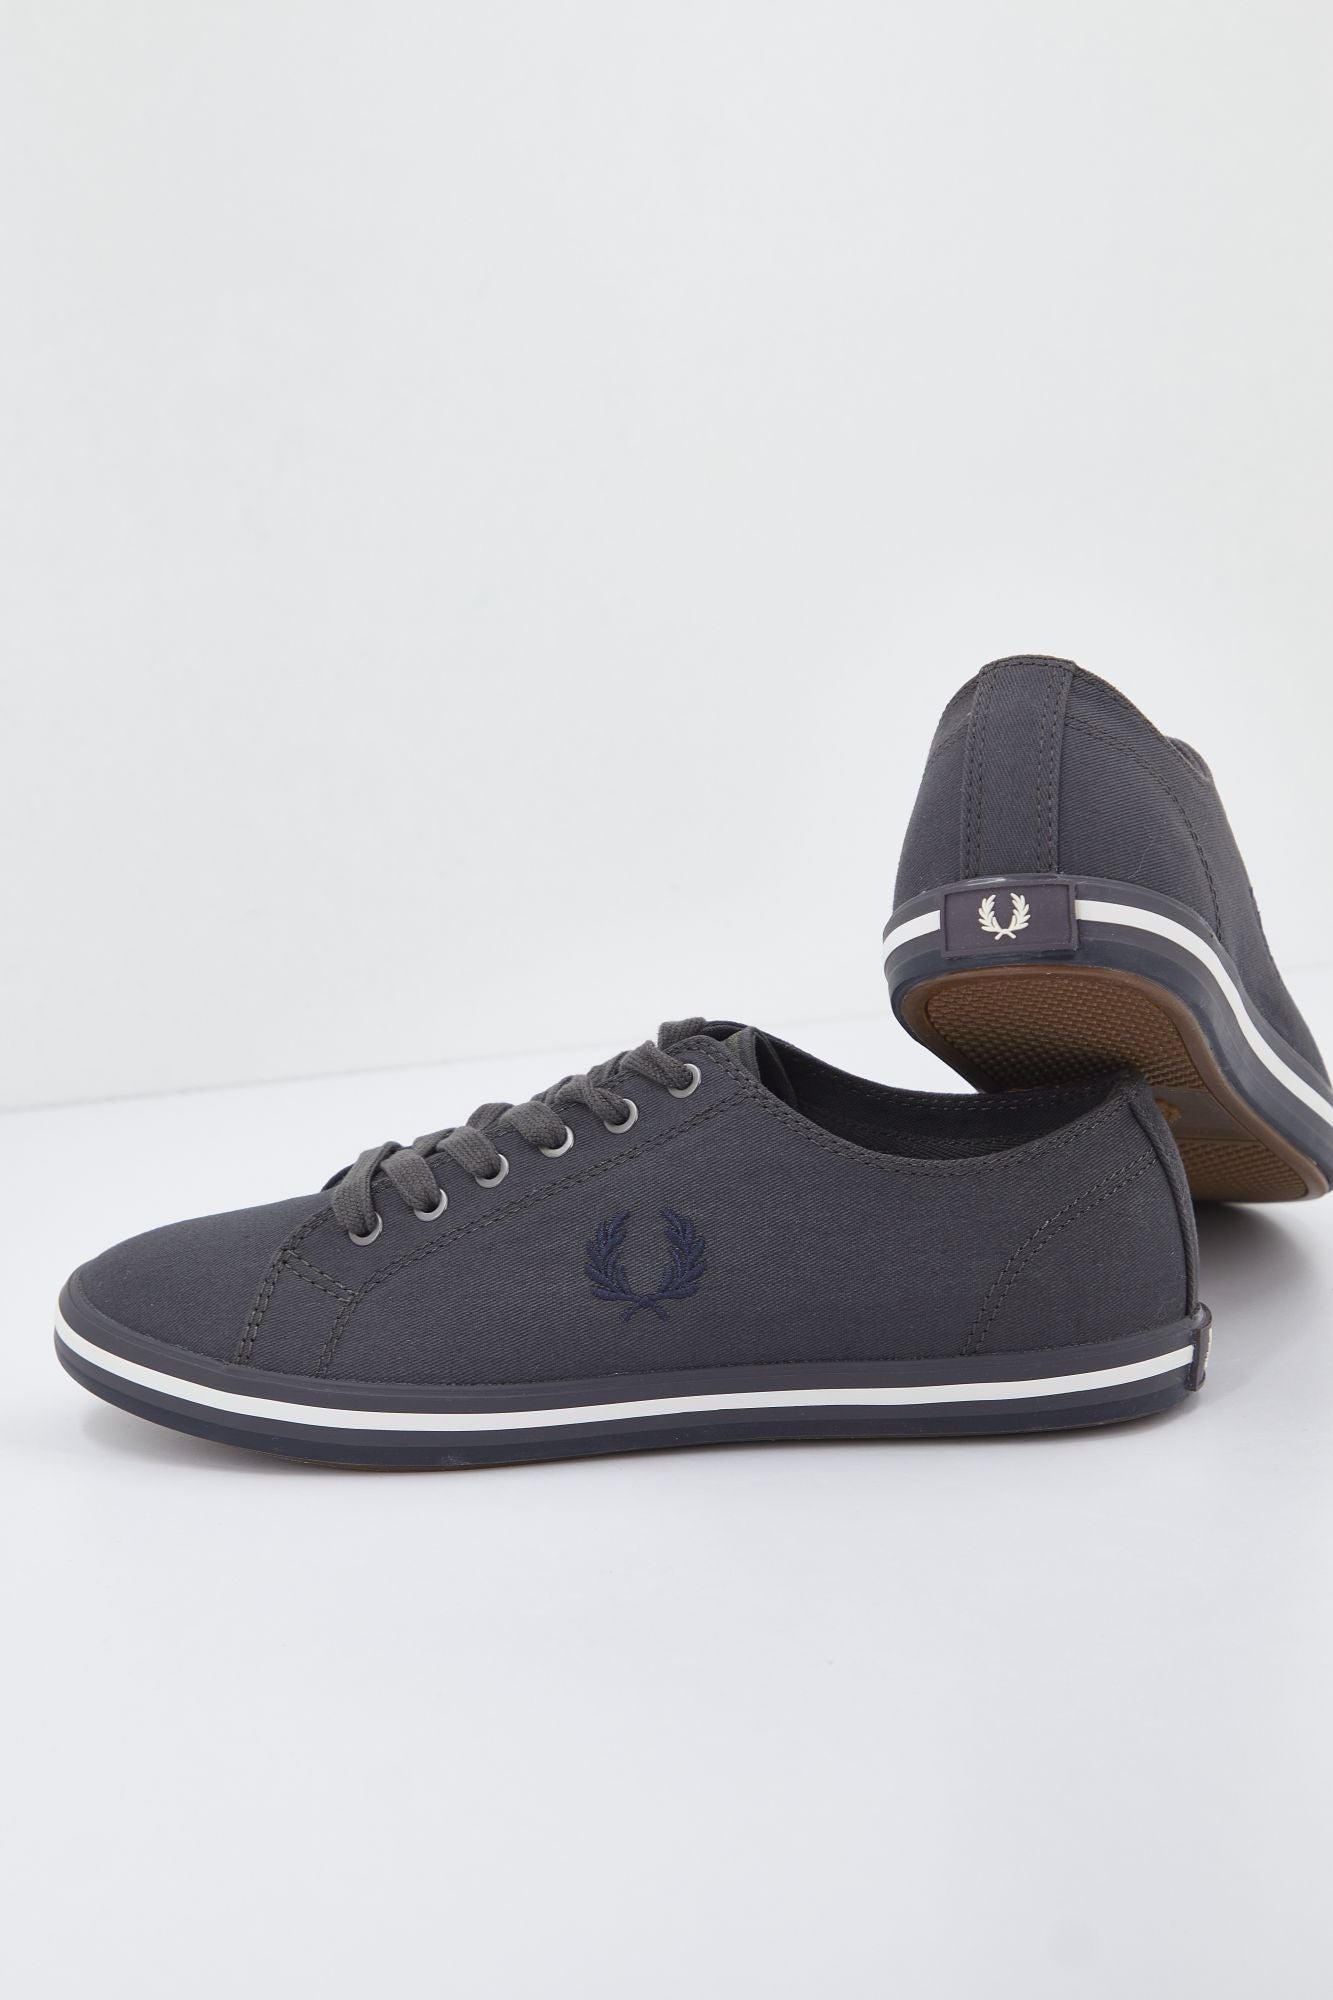 FRED PERRY KINGSTON TWILL en color GRIS (4)